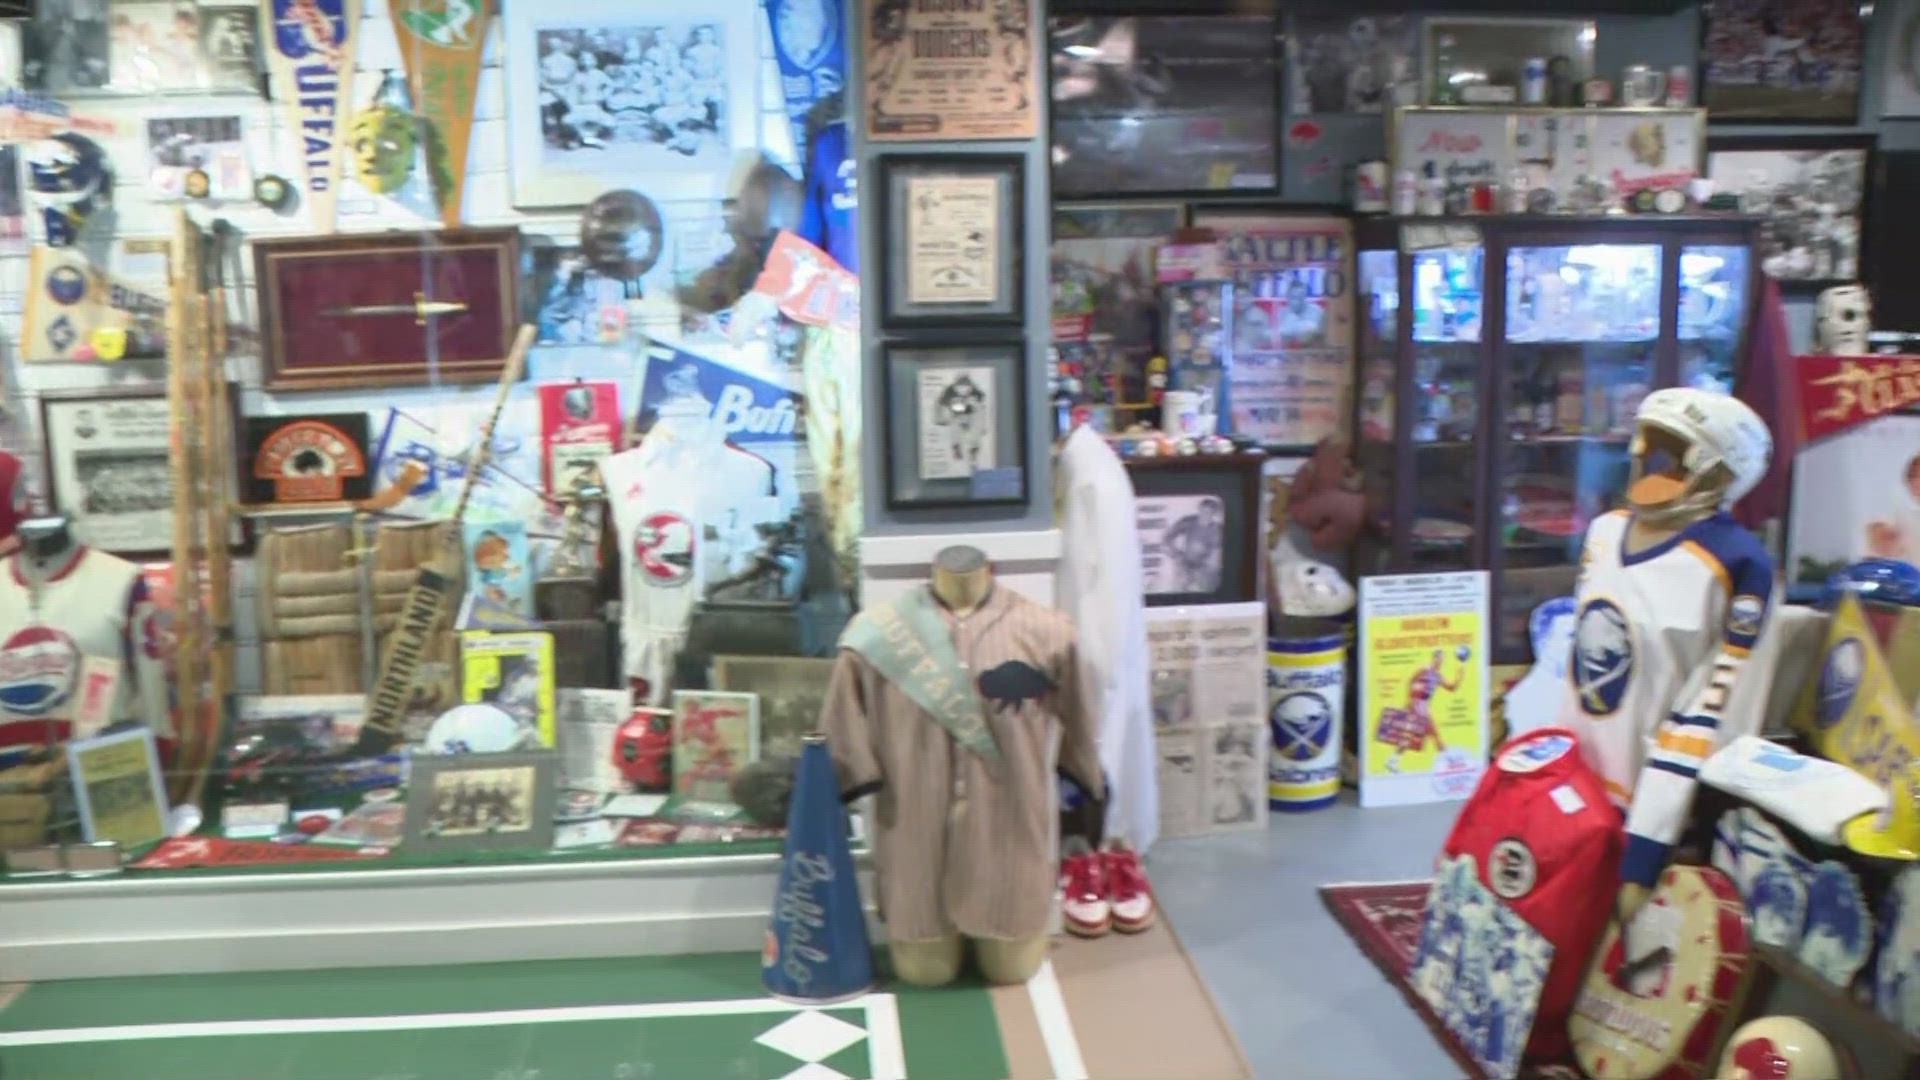 Memories created through sports lives on in this Grand Island basement.